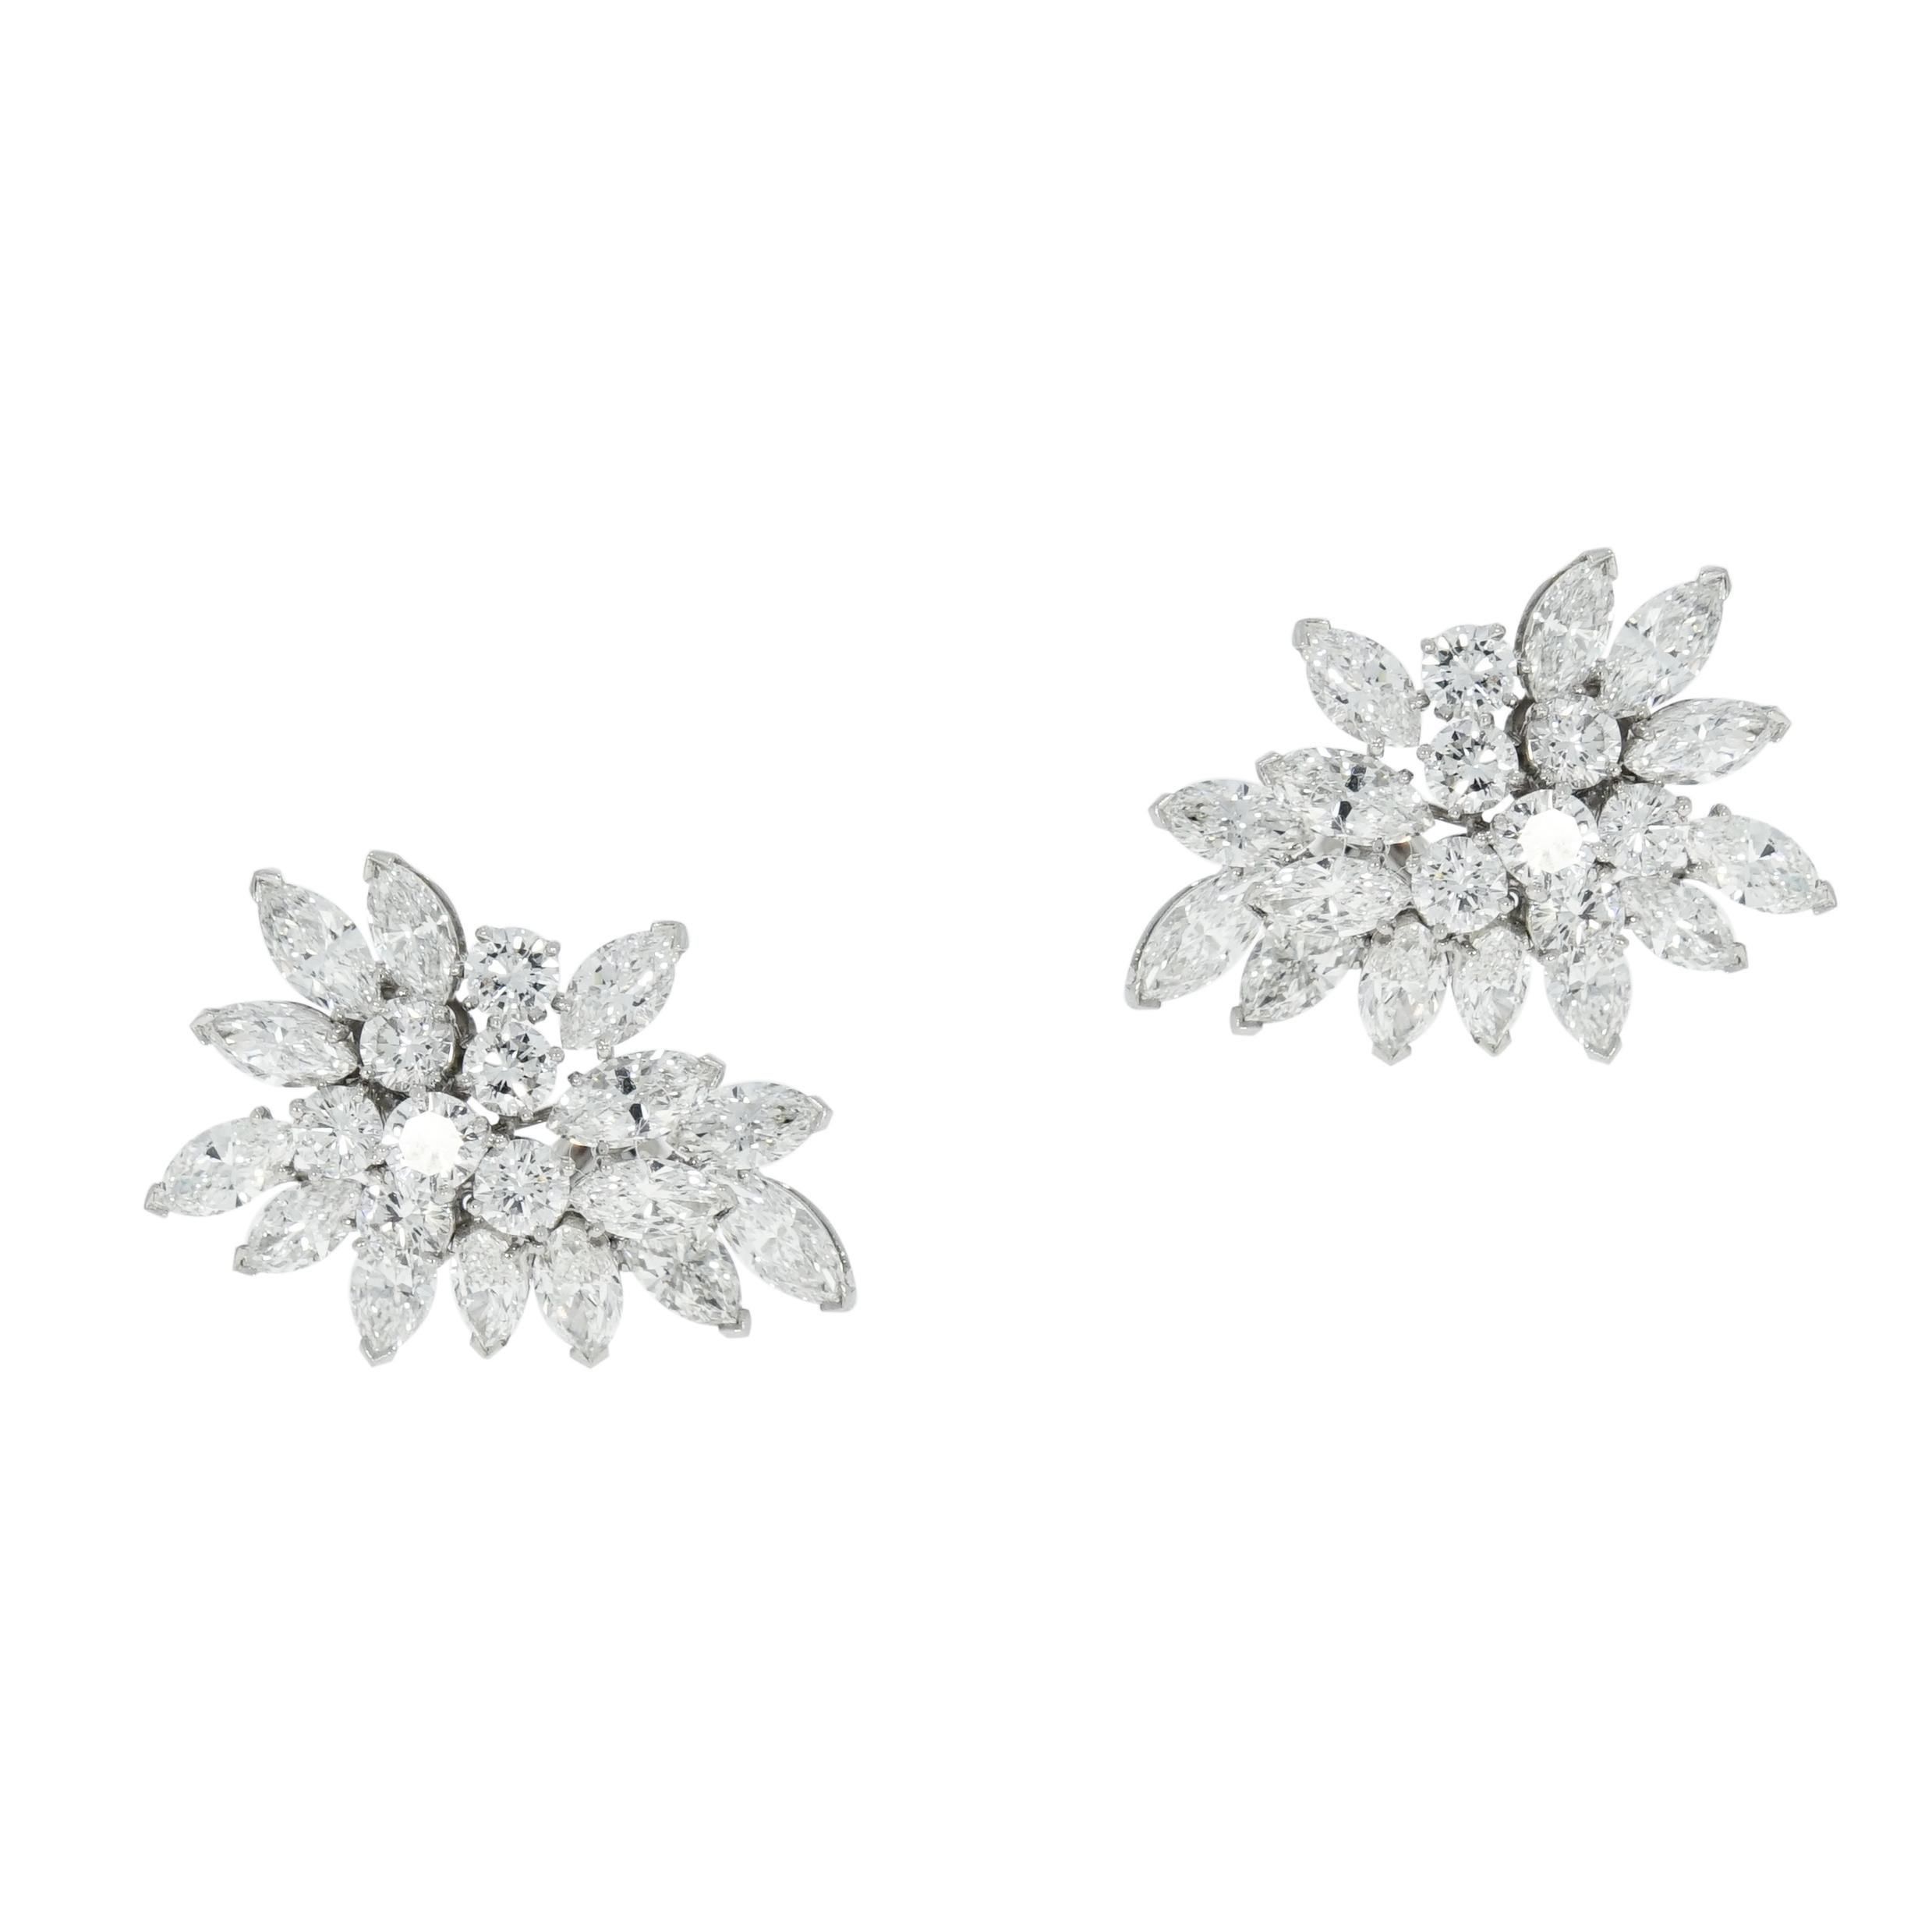 Van Cleef & Arpels has long established itself in the world of designer jewelry.
And this Classic pair of Diamond cluster earrings is just perfect to showcase the beauty of the Diamonds. 
Comprised of 28 marquise shaped and 14 round cut diamonds,